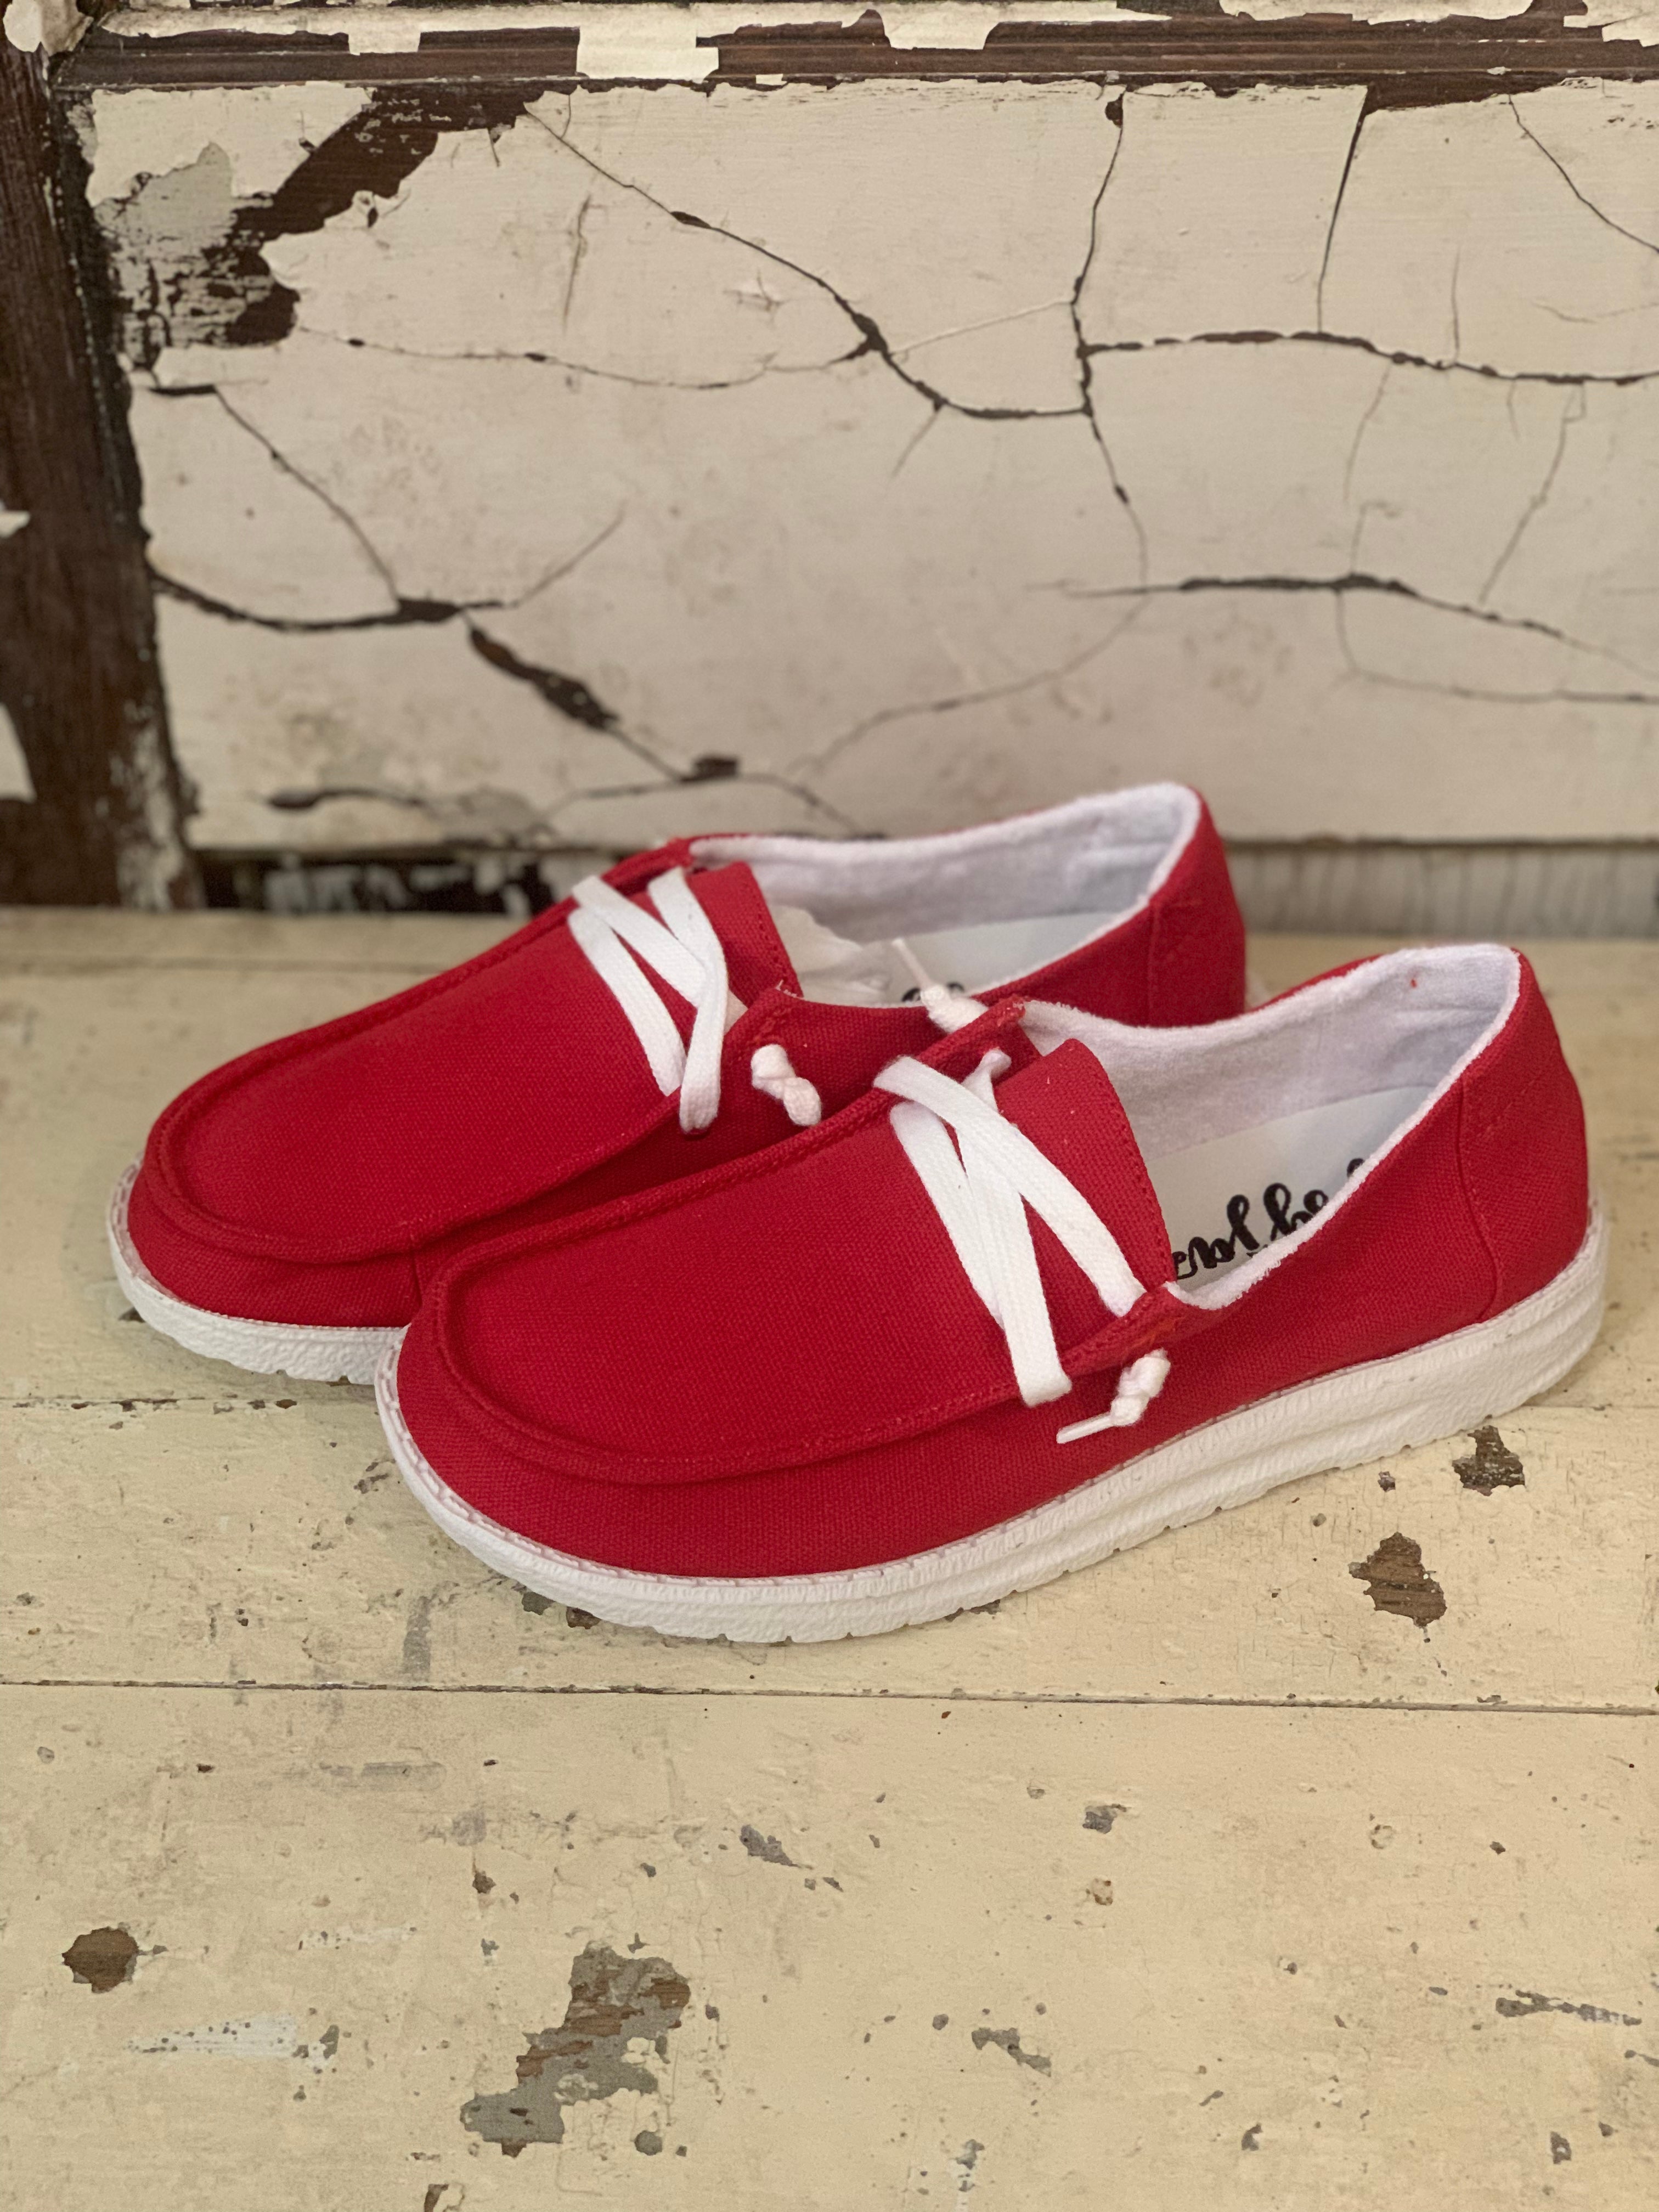 Gypsy Jazz RED Game Day Canvas Shoes